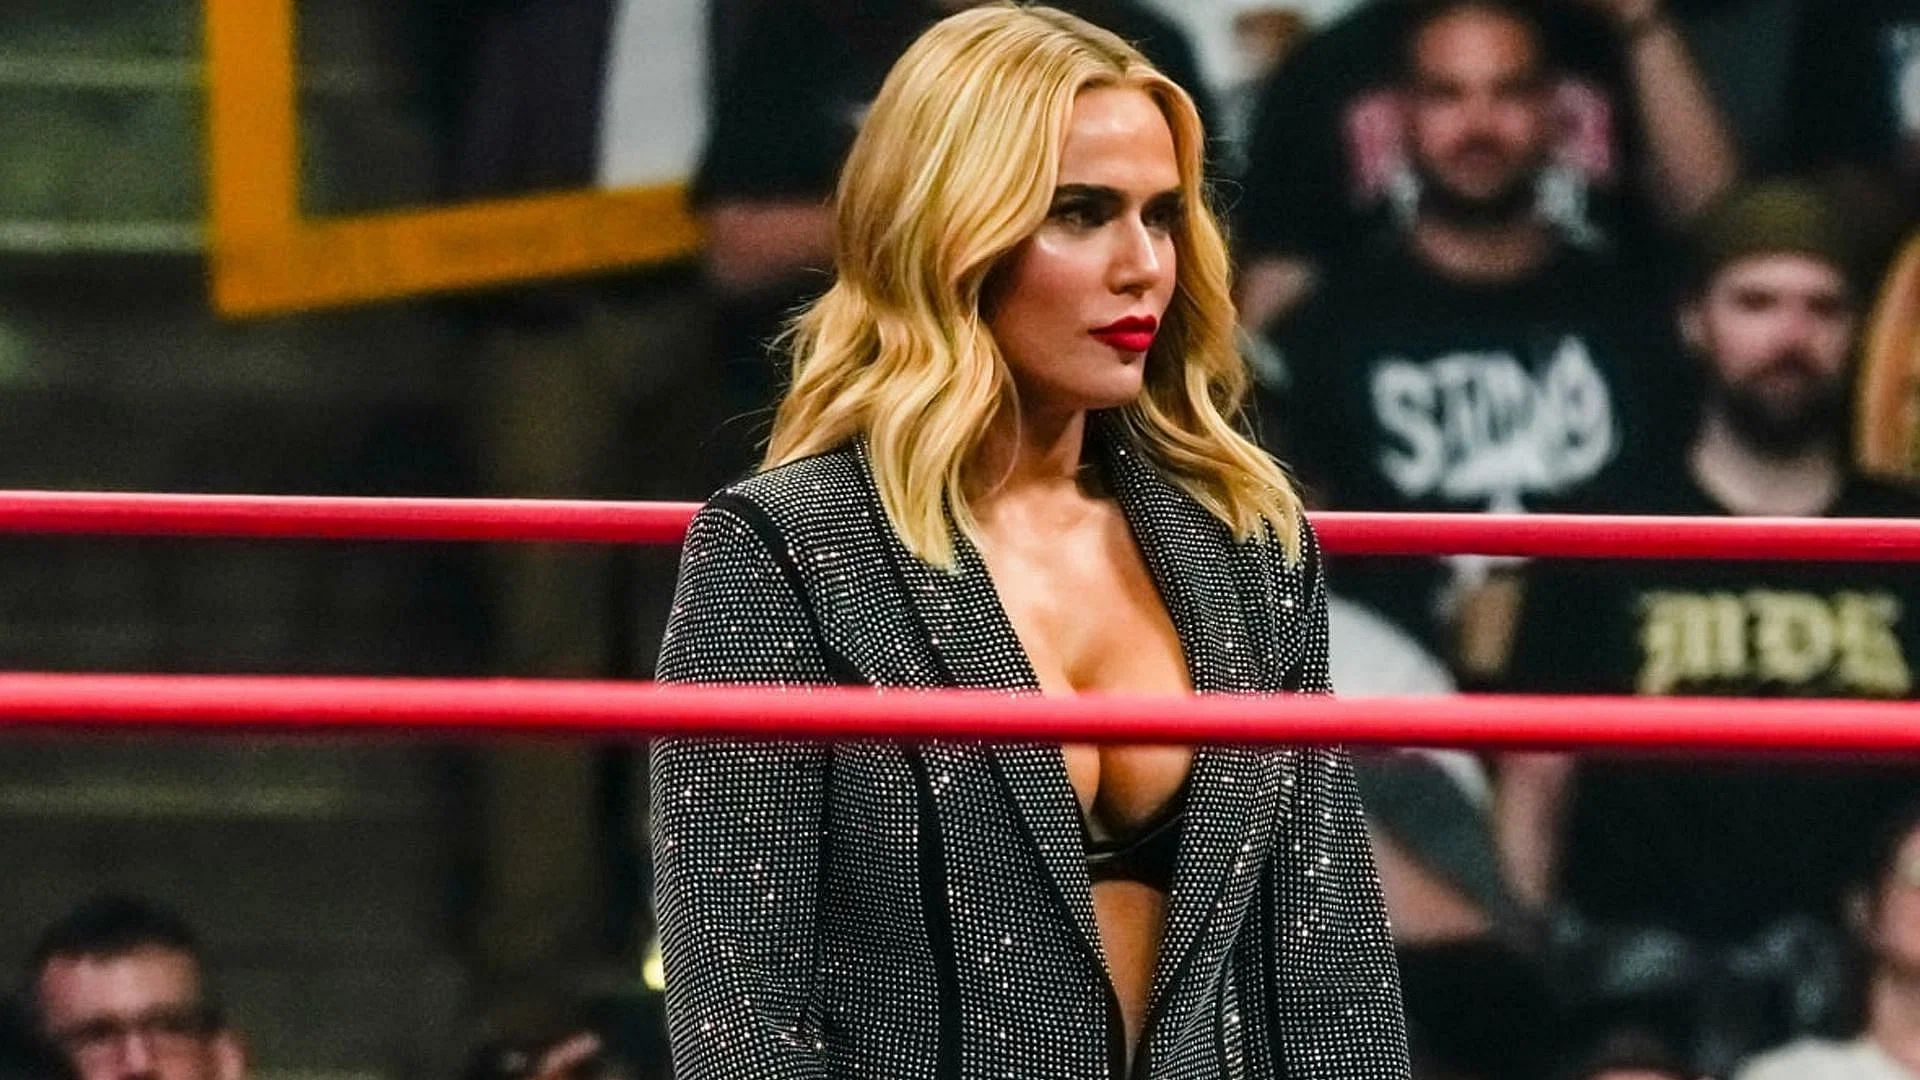 CJ Perry is currently a part of AEW as a manager